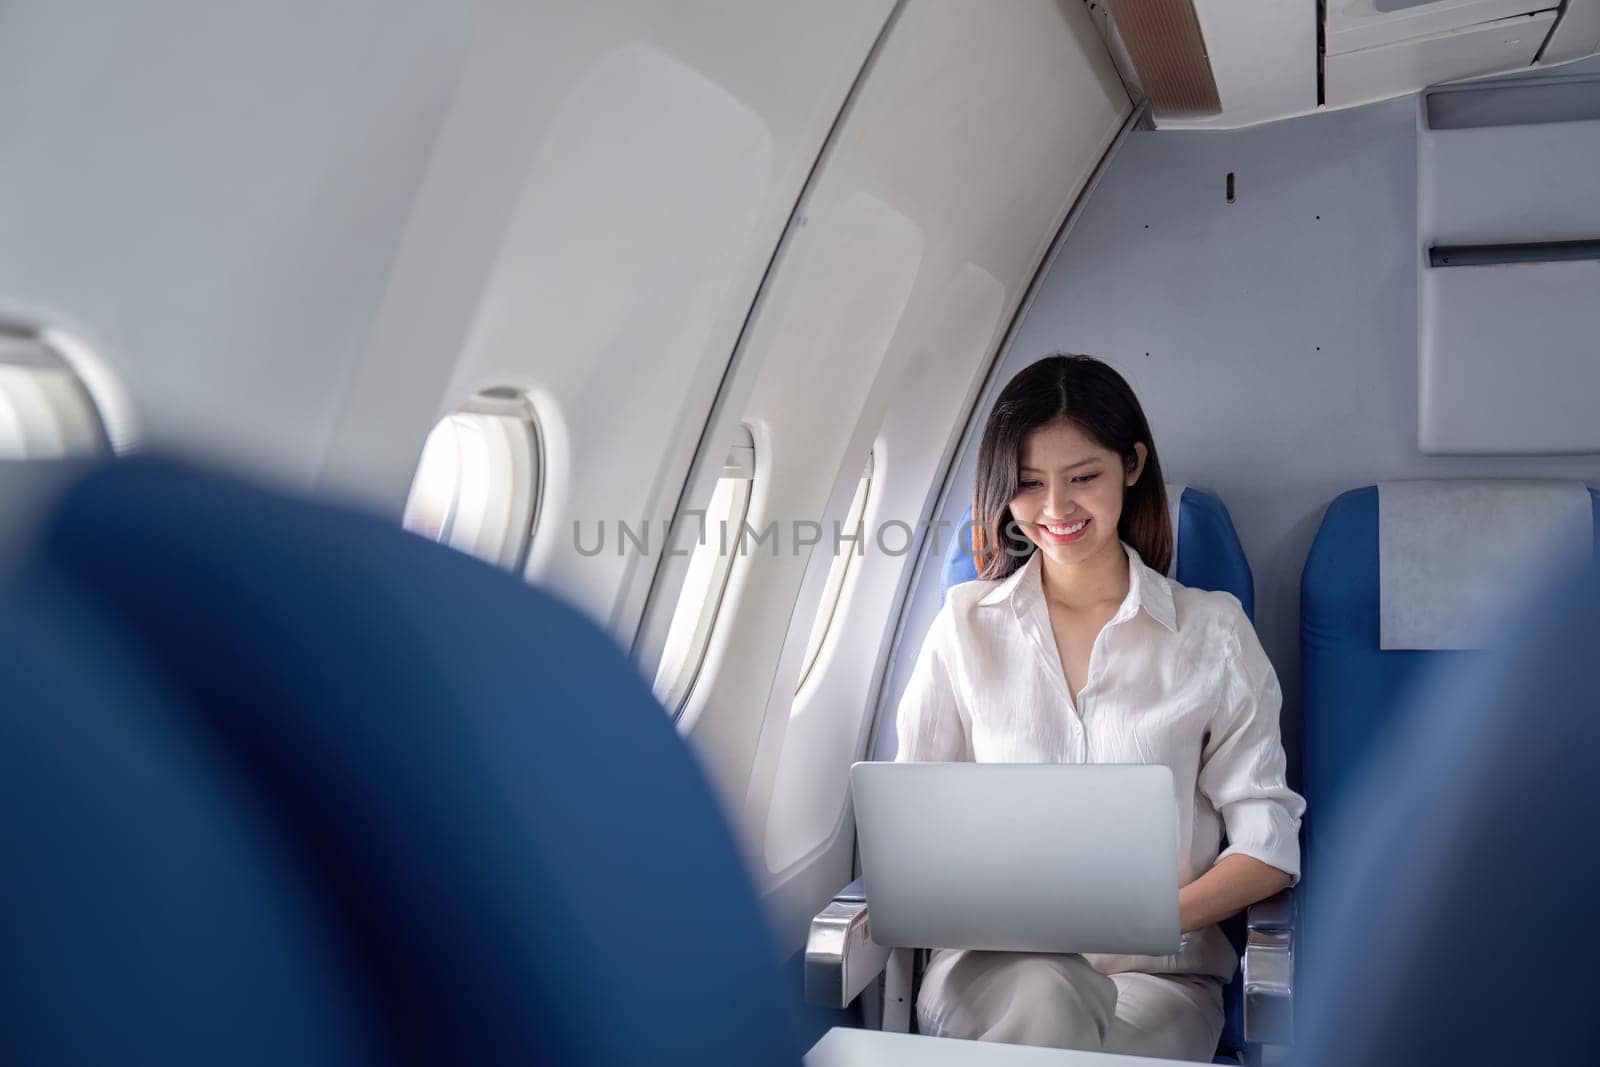 Professional businesswoman working on a laptop during airplane travel, showcasing modern corporate travel and connectivity.